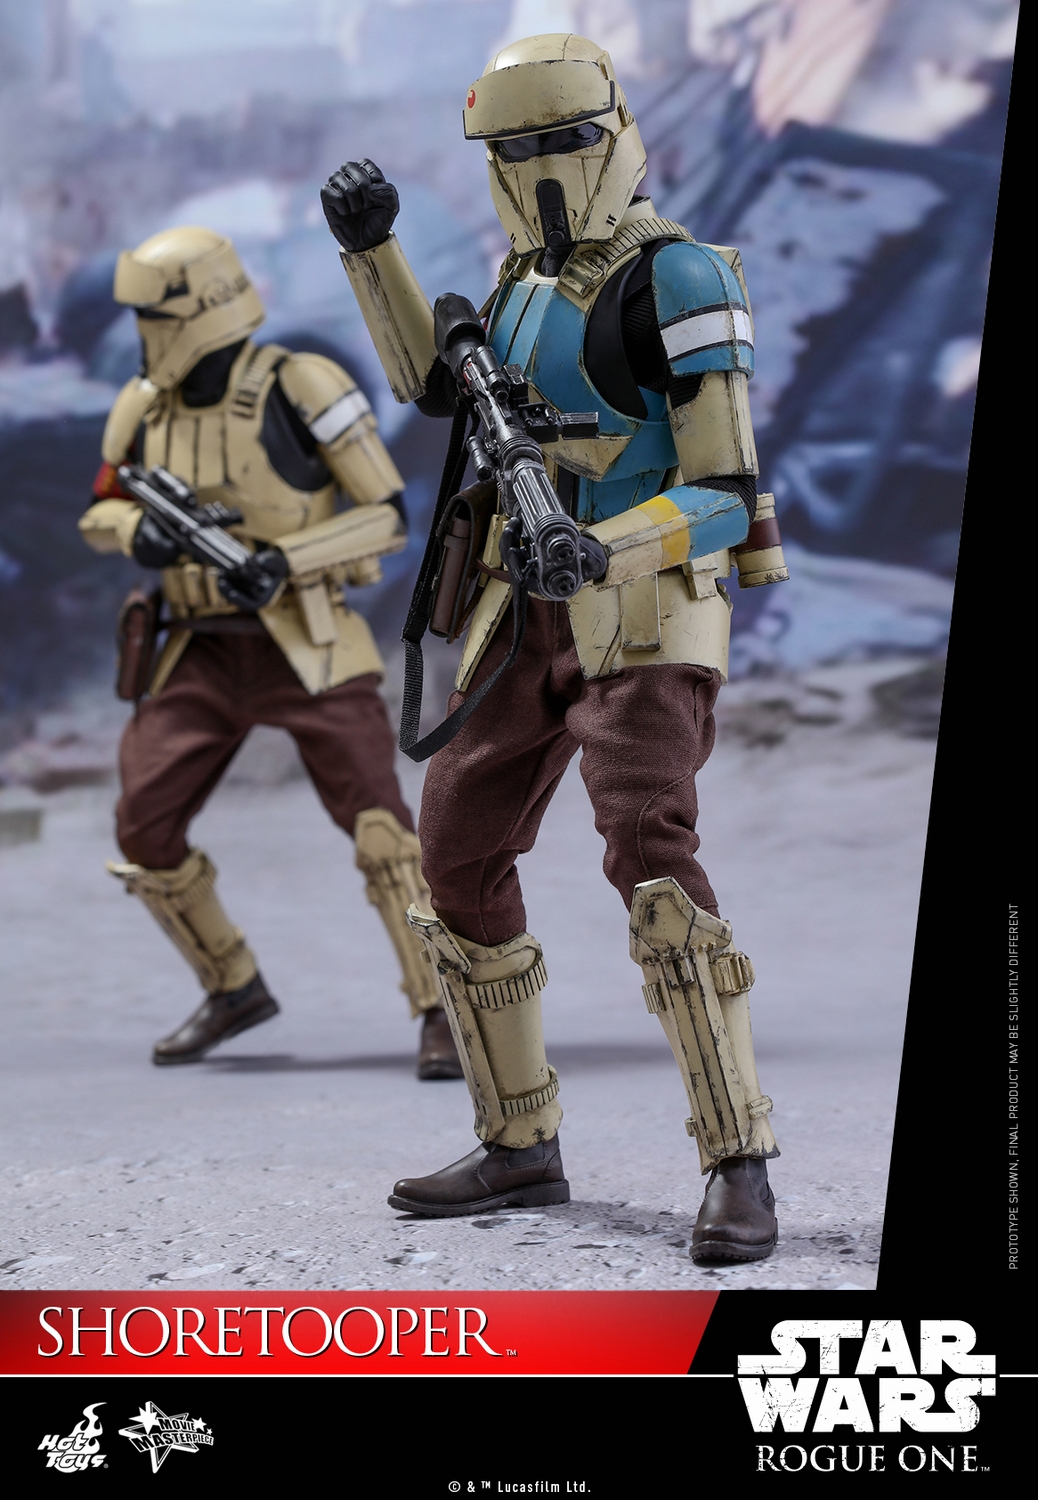 hot-toys-star-wars-rogue-one-shoretrooper-collectible-figure-092916-013.jpg